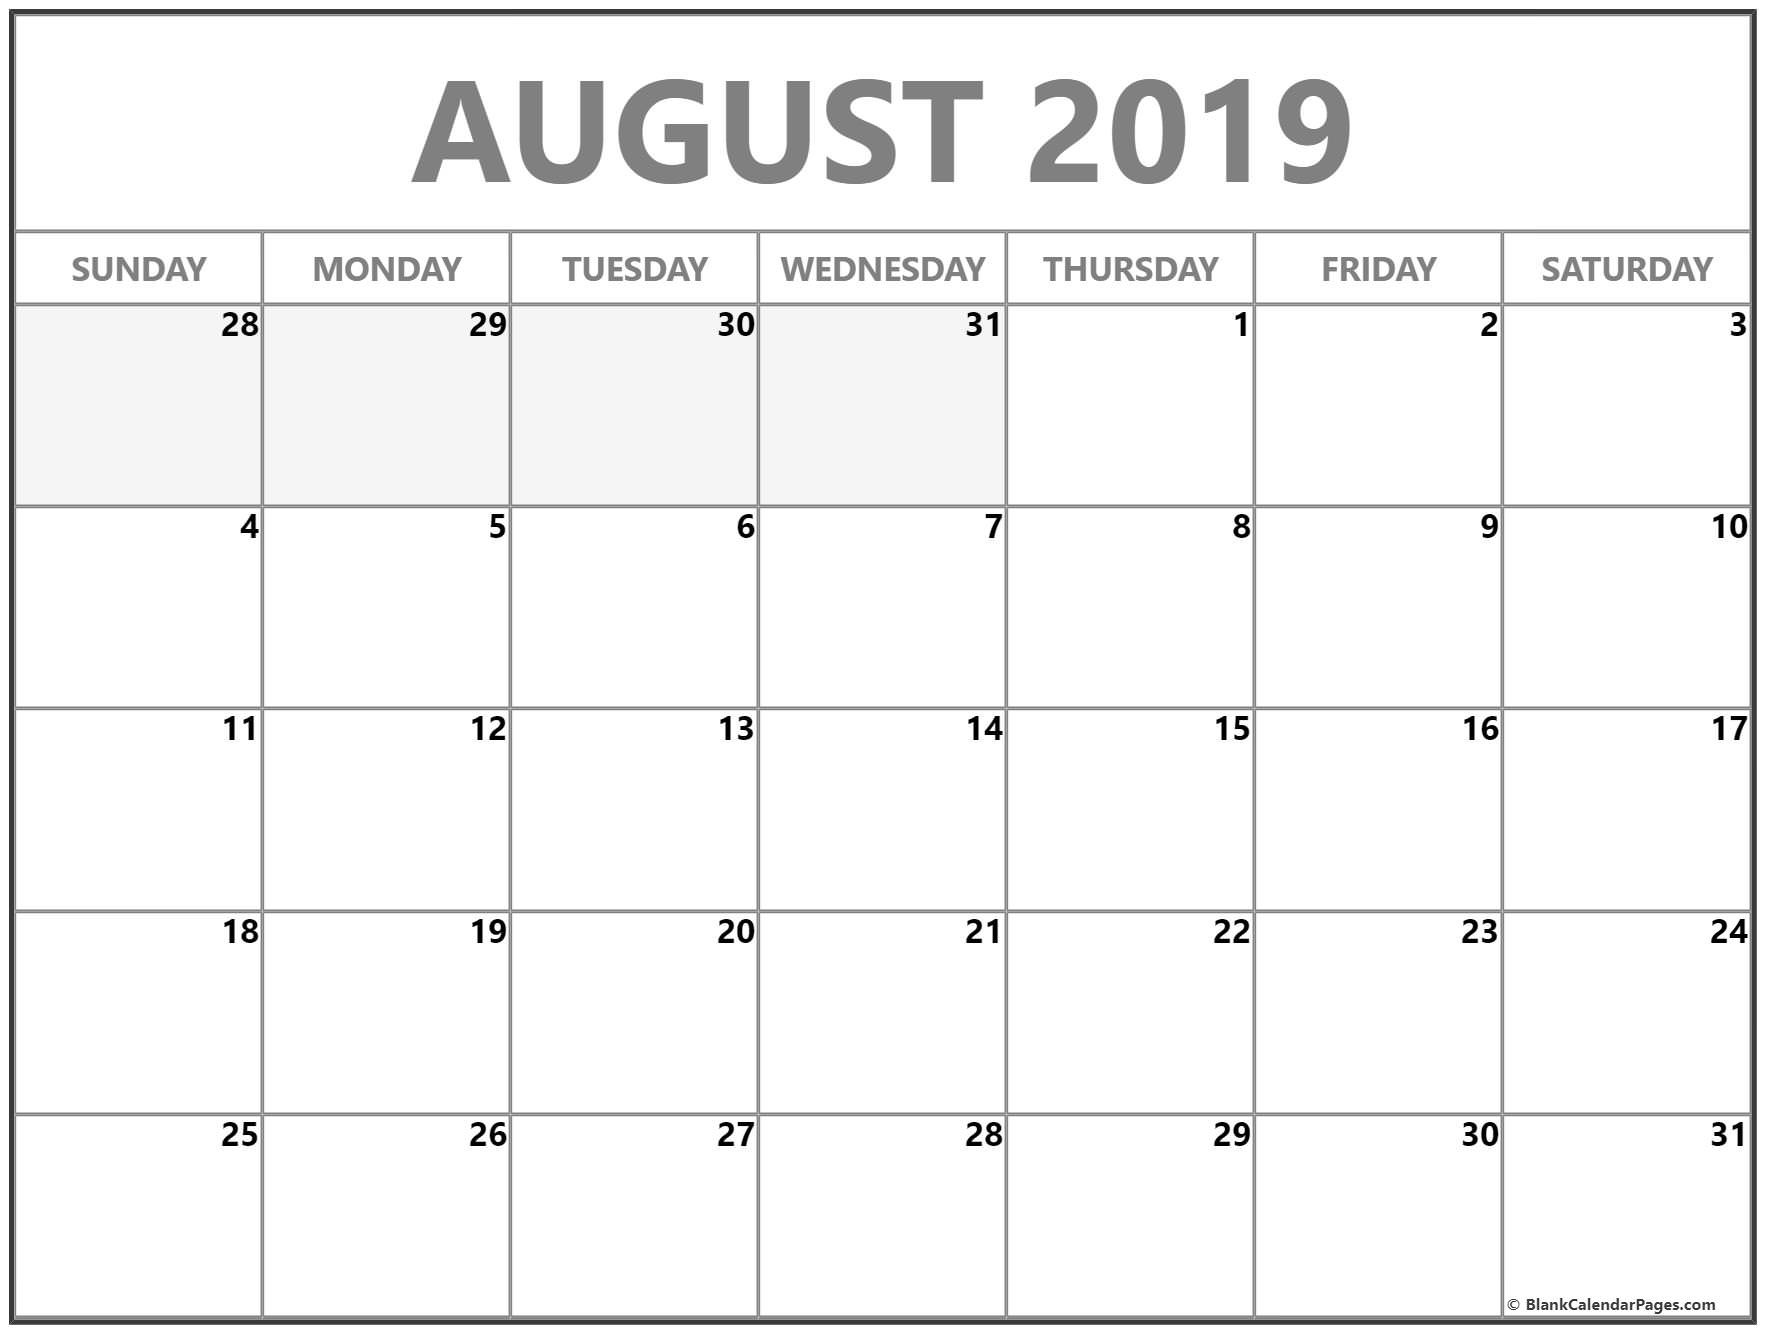 August 2019 Calendar | Free Printable Monthly Calendars-Blank Timetable For The Month Of July And August